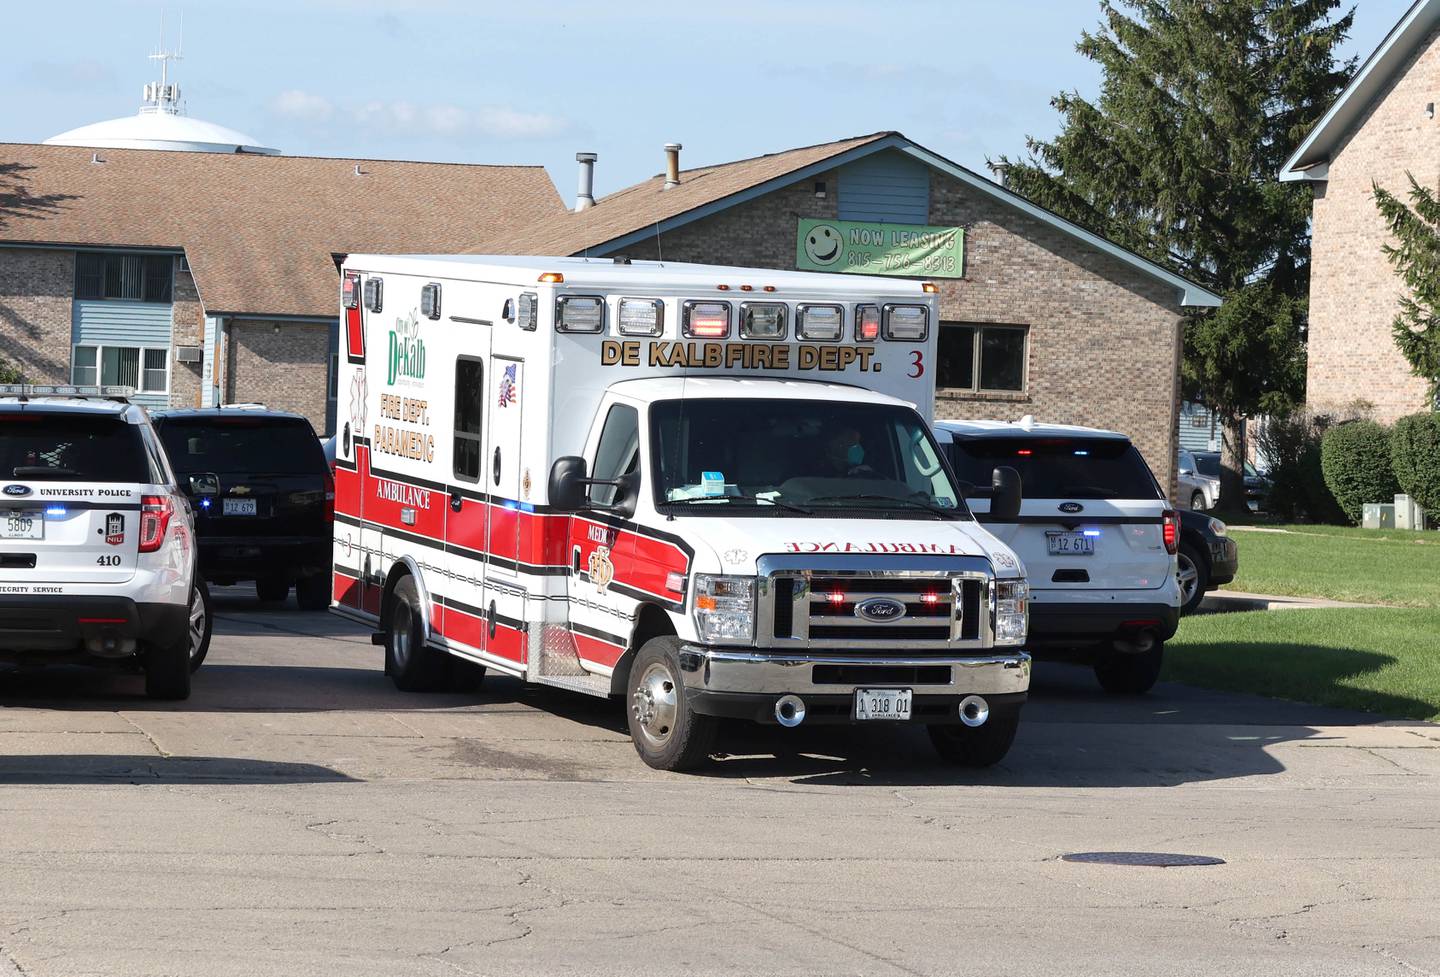 A DeKalb Fire Department ambulance leaves the scene of a shooting Wednesday, Aug. 24, 2022, at West Ridge Apartments in DeKalb.